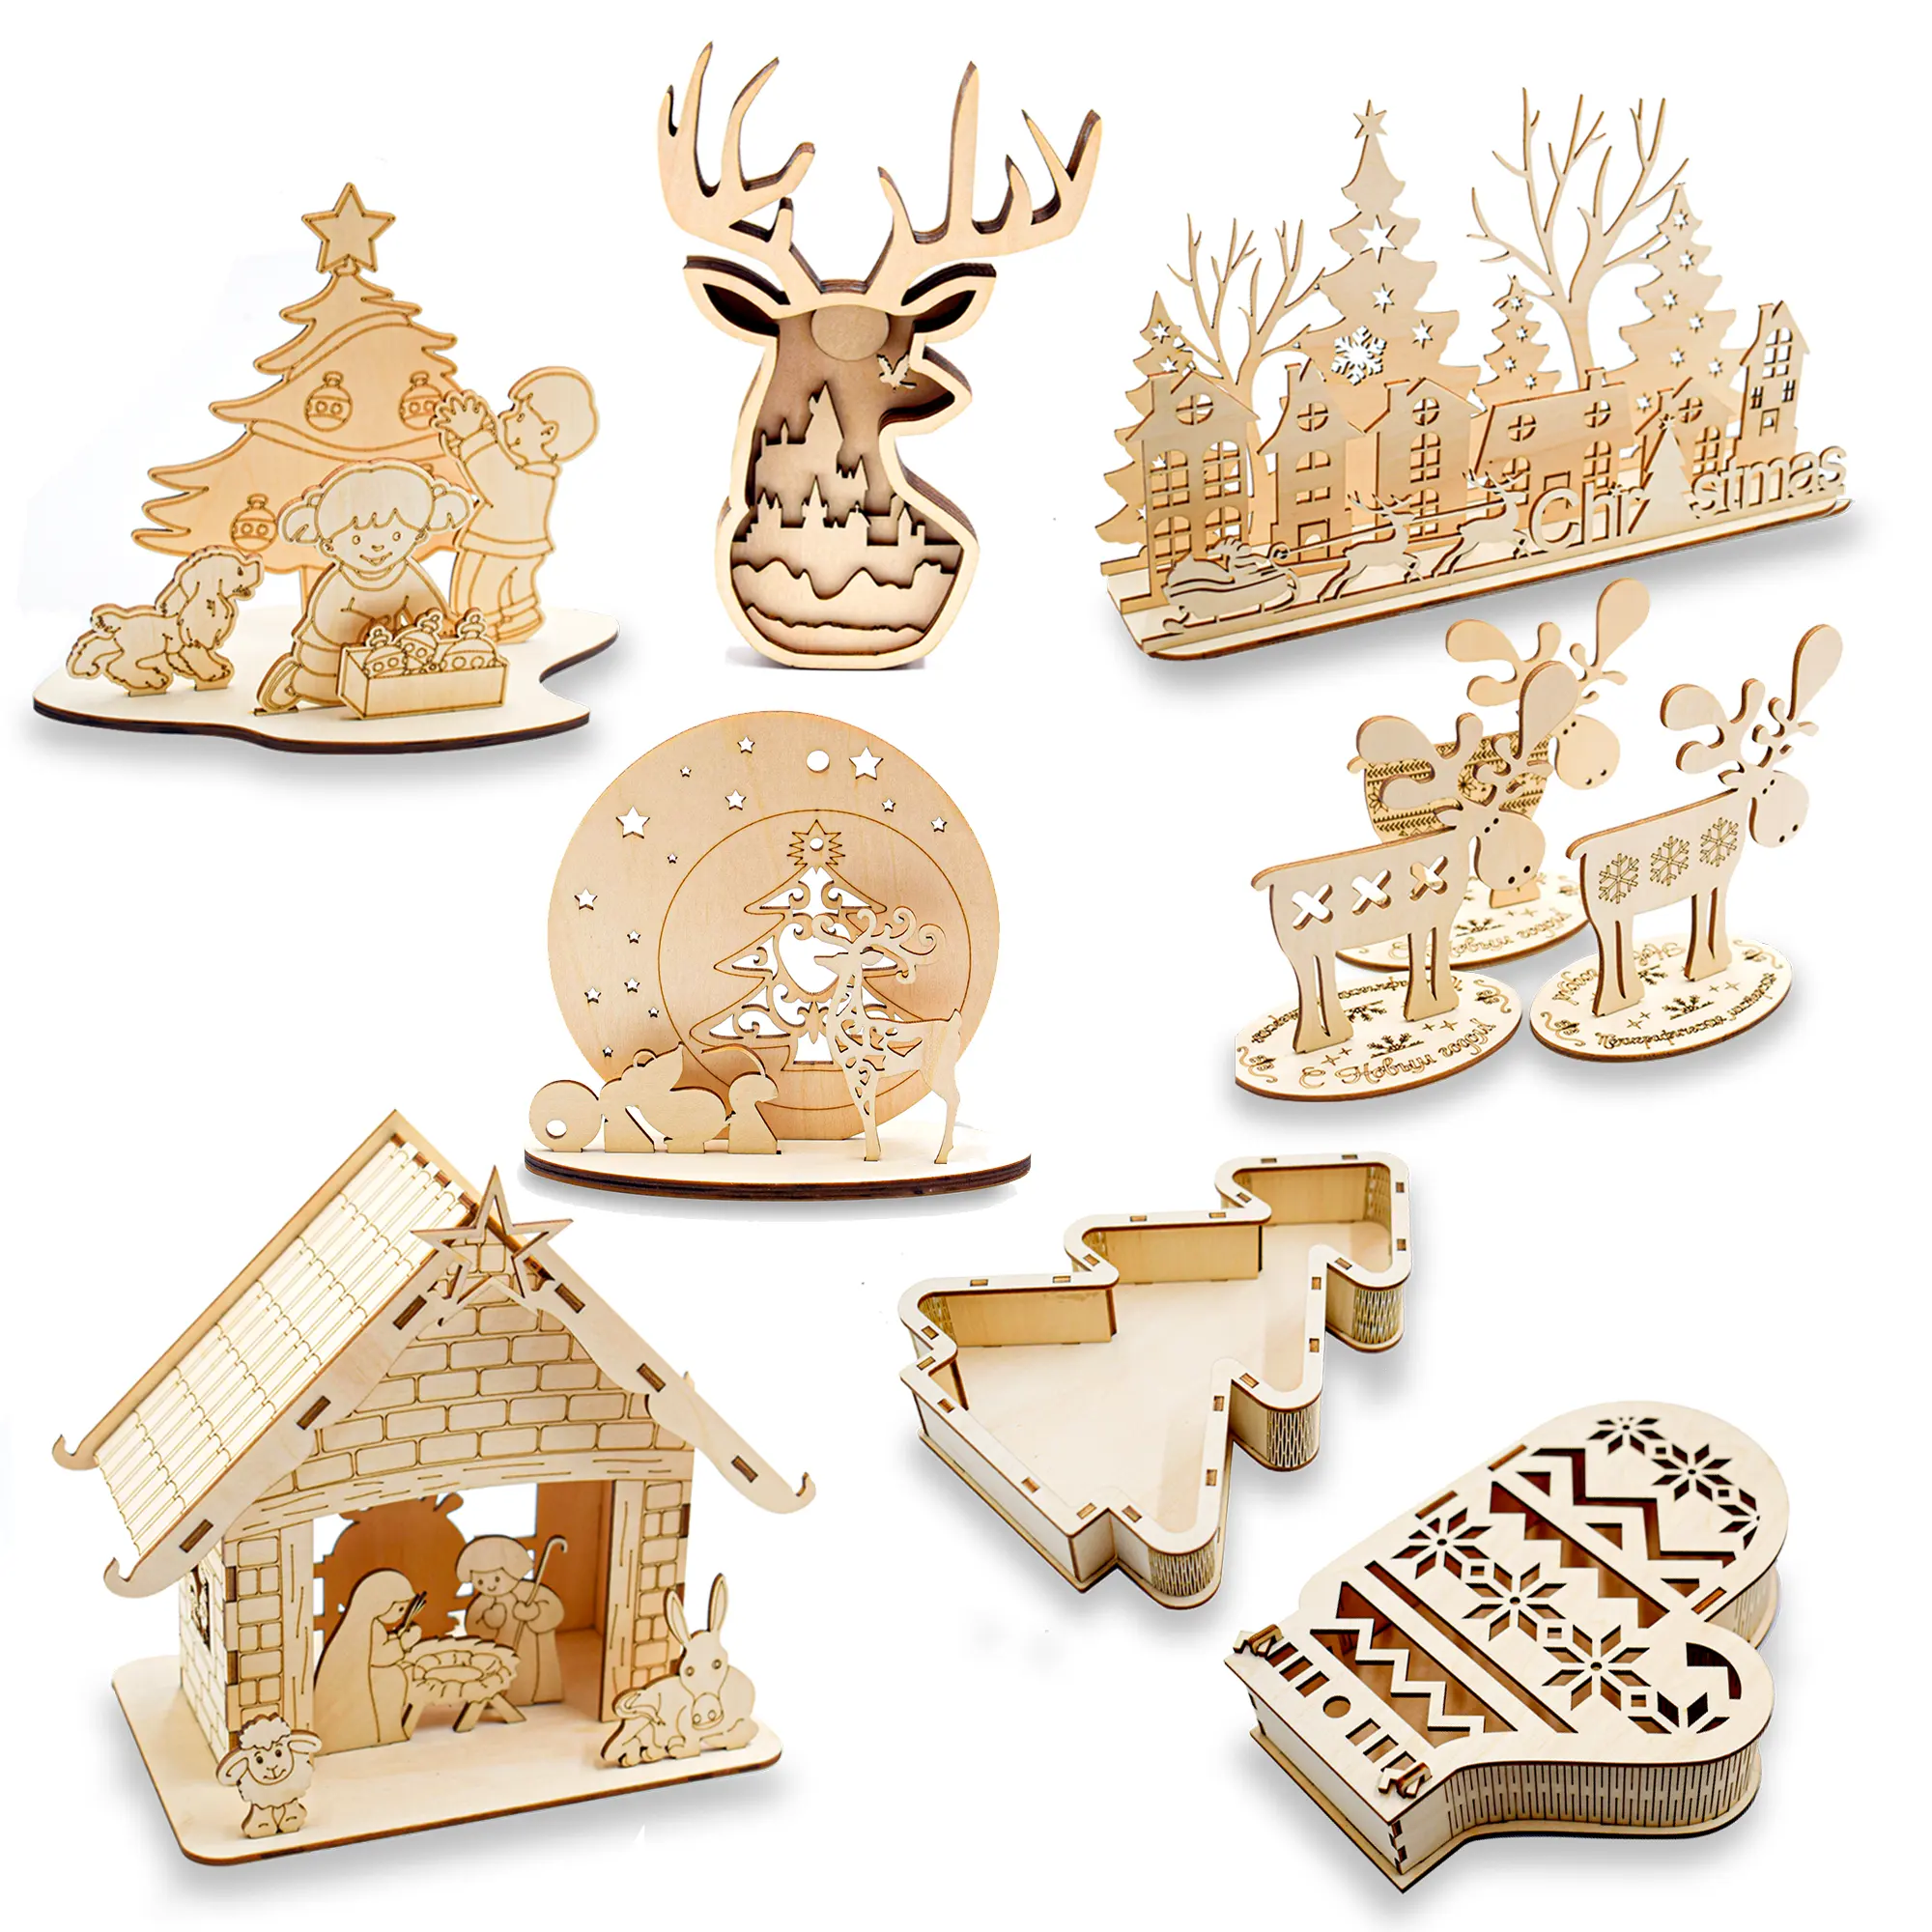 Customize Christmas wooden craft products - Jesus Nativity wooden decorations, Christmas candy box, Christmas wooden decorations